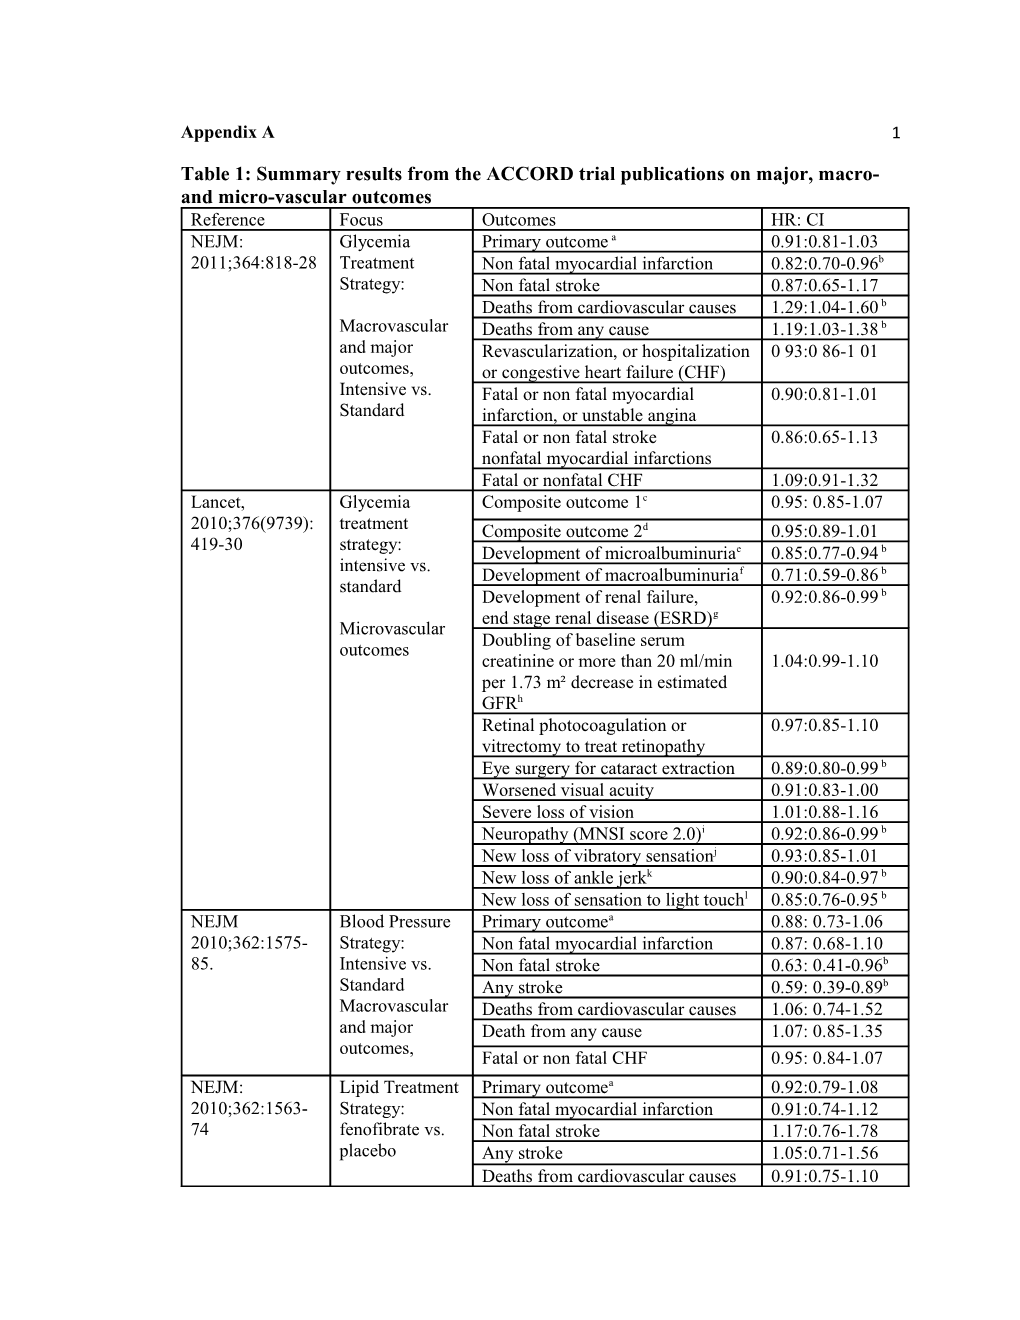 Table 1: Summary Results from the ACCORD Trial Publications on Major, Macro- and Micro-Vascular